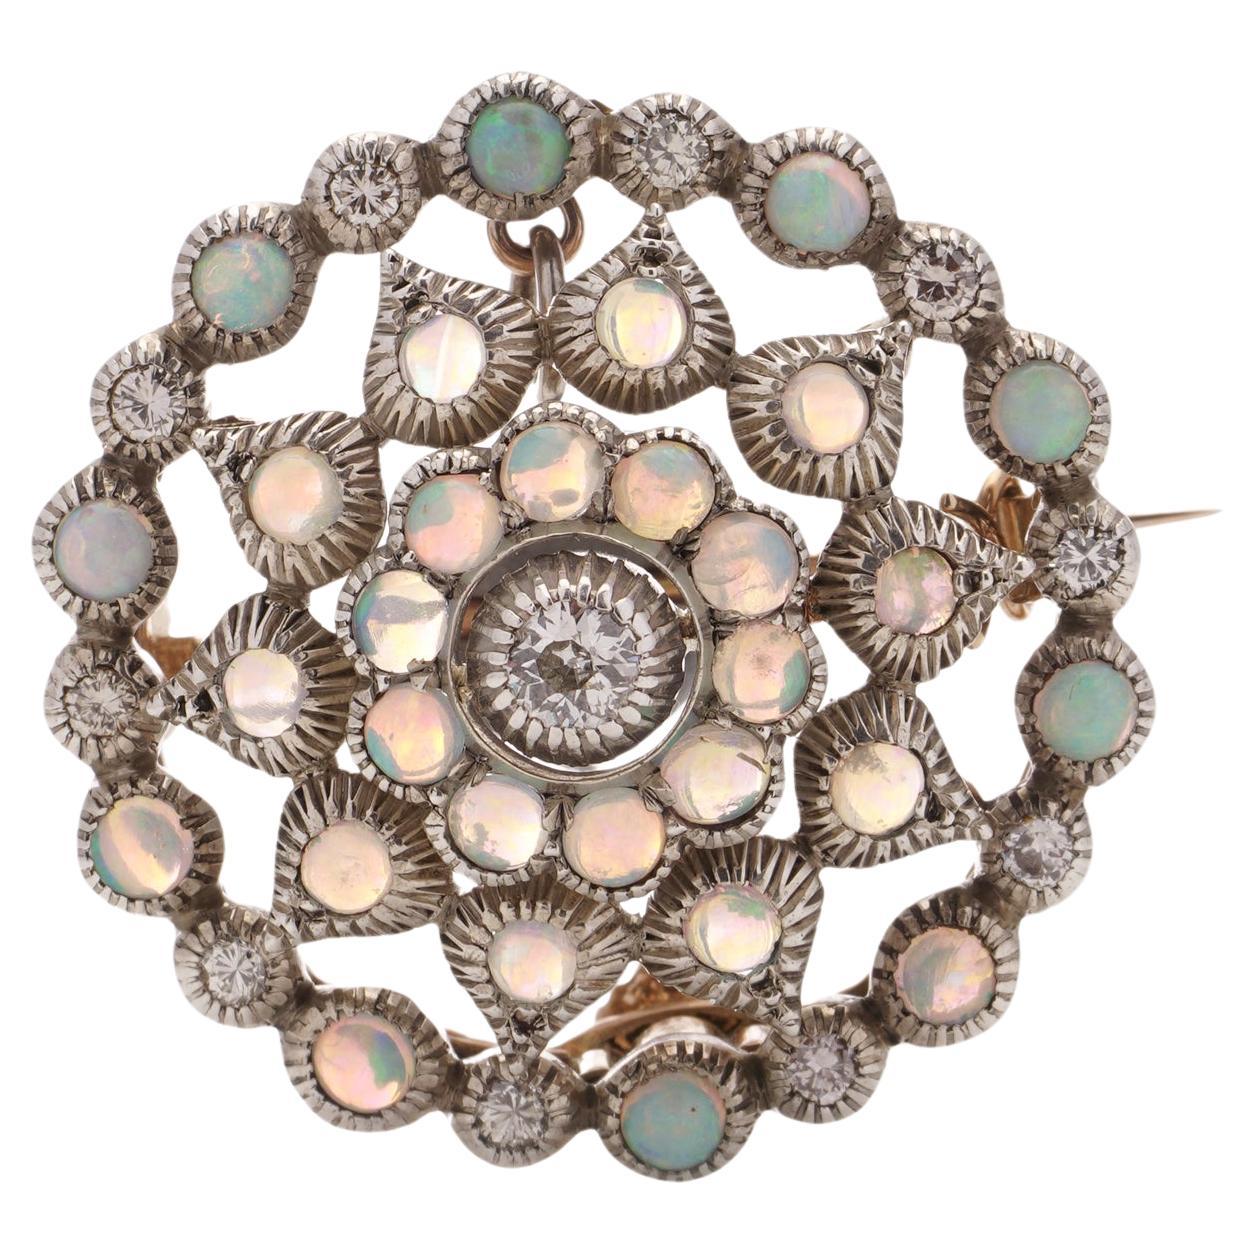 Edwardian 9kt rose gold and silver round Opal and diamond brooch/pendant